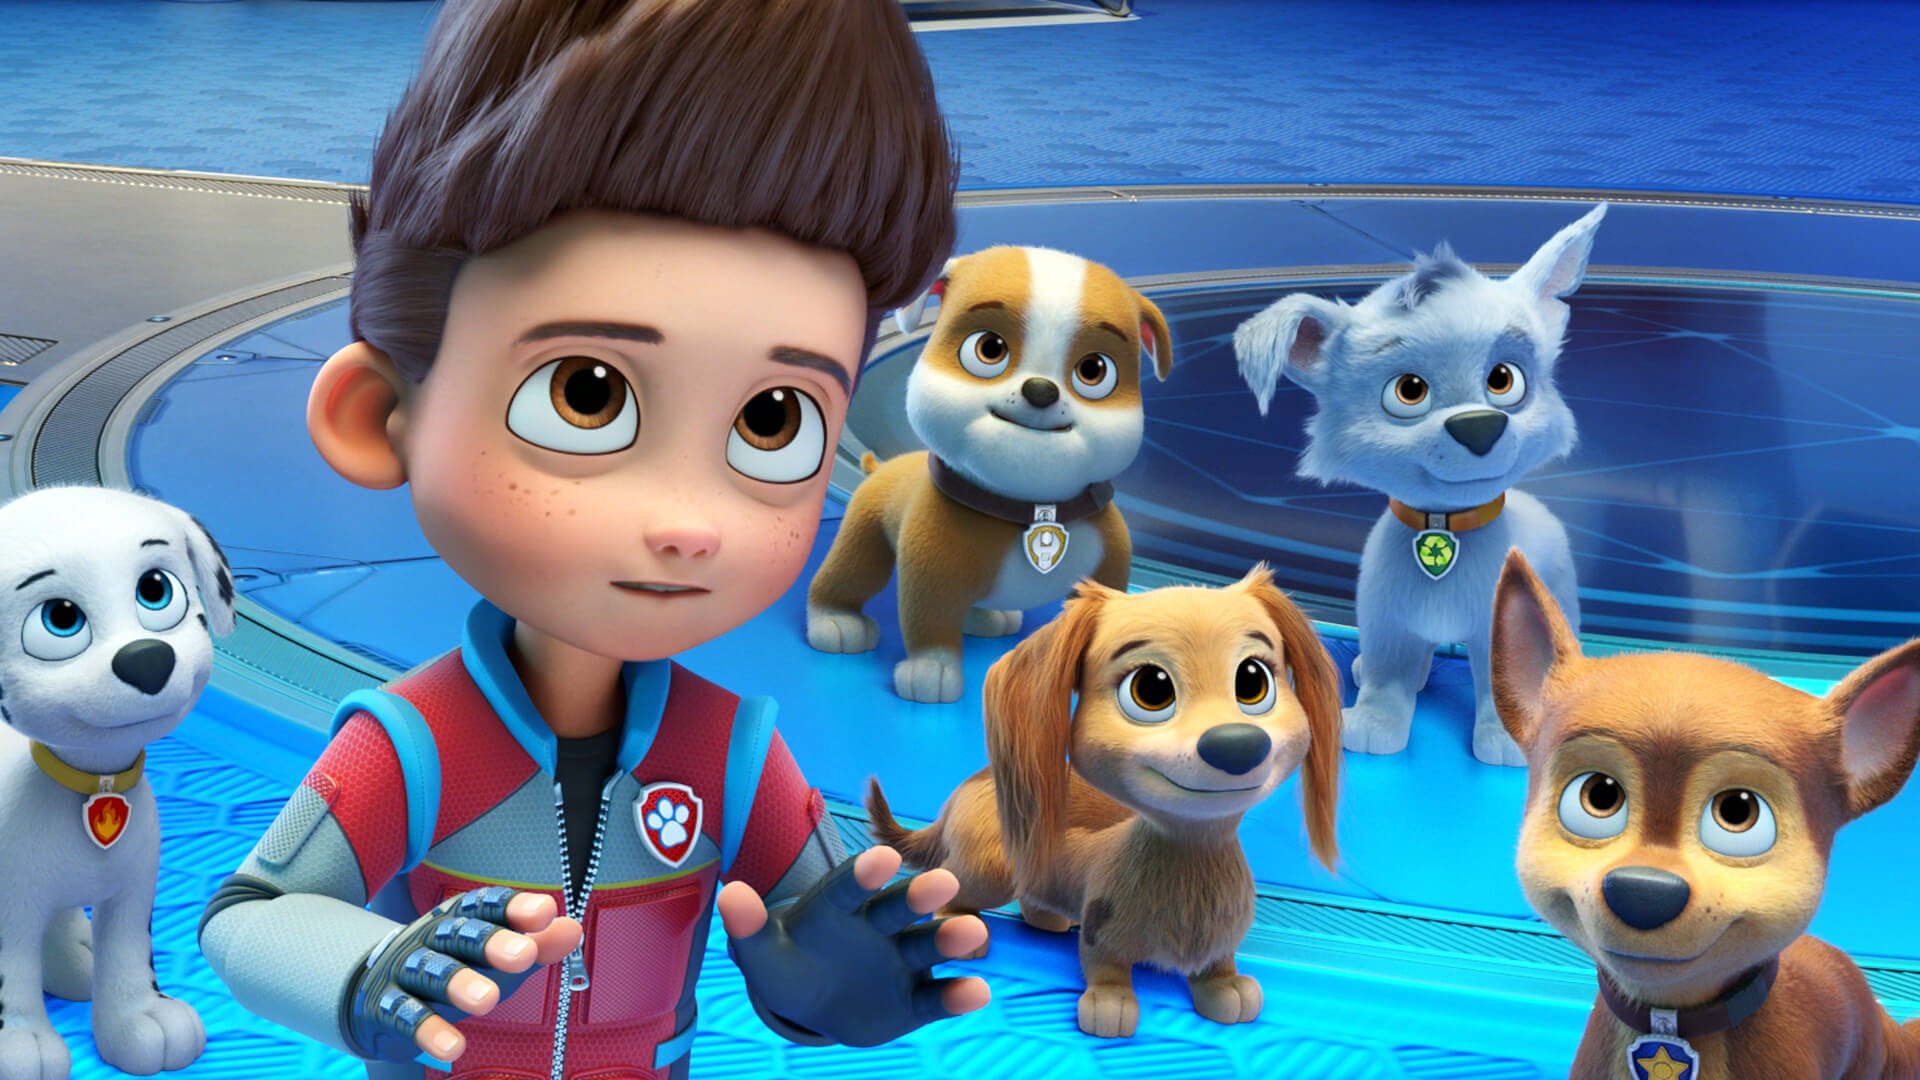 Third 'PAW Patrol' Movie Officially in the Works